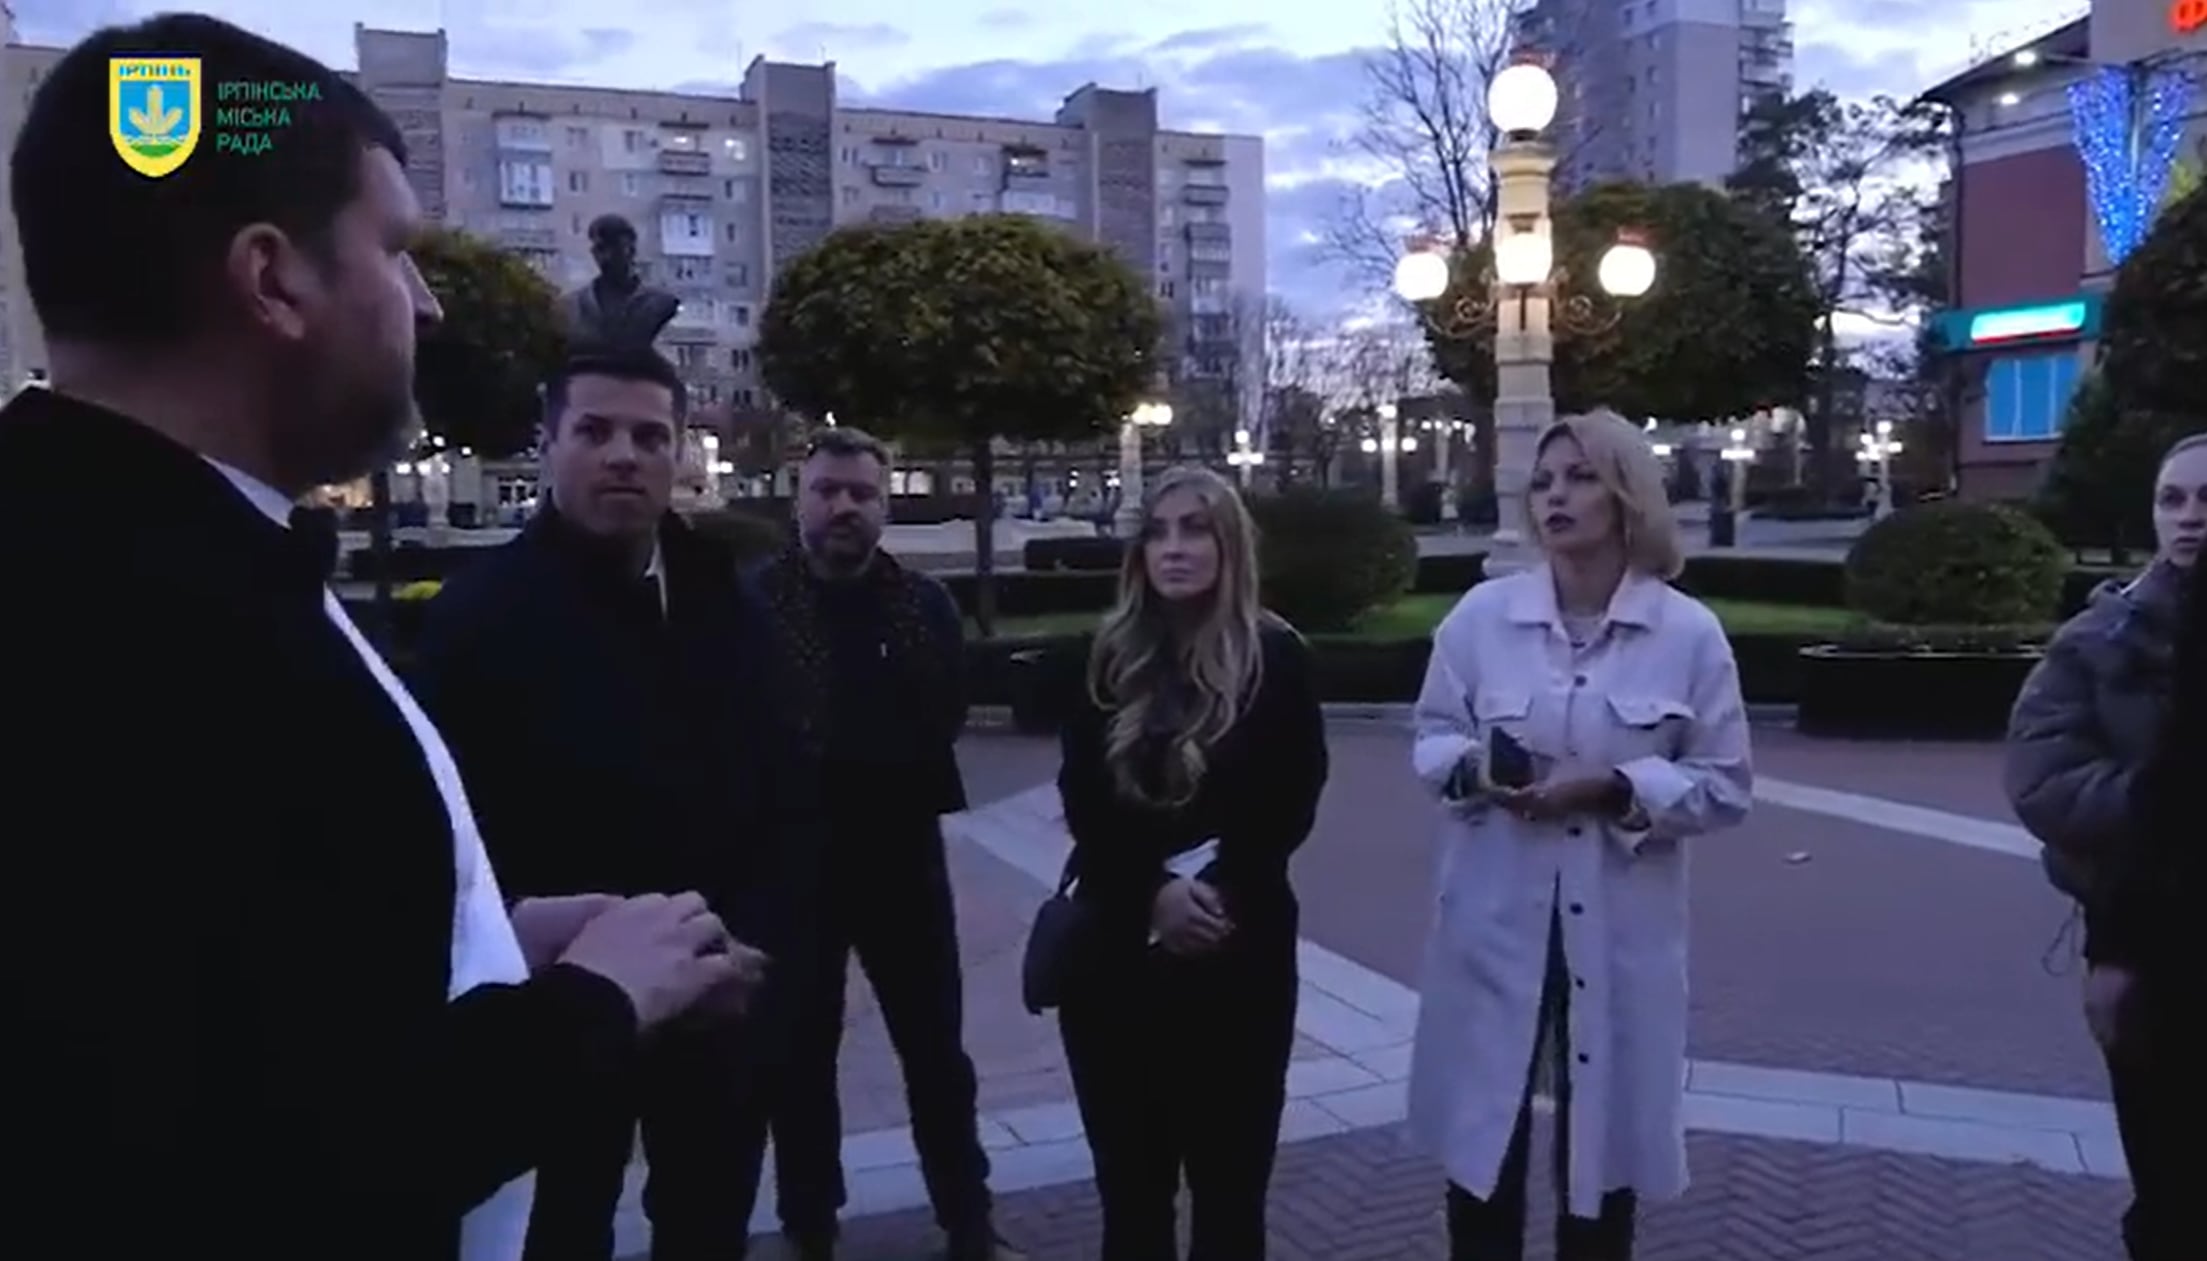 (Screen capture) Vineyard City Mayor Julie Fullmer, seen wearing dark clothes in the center of this screen capture from a promotional video, tours Irpin, Ukraine, sometime in late 2023.